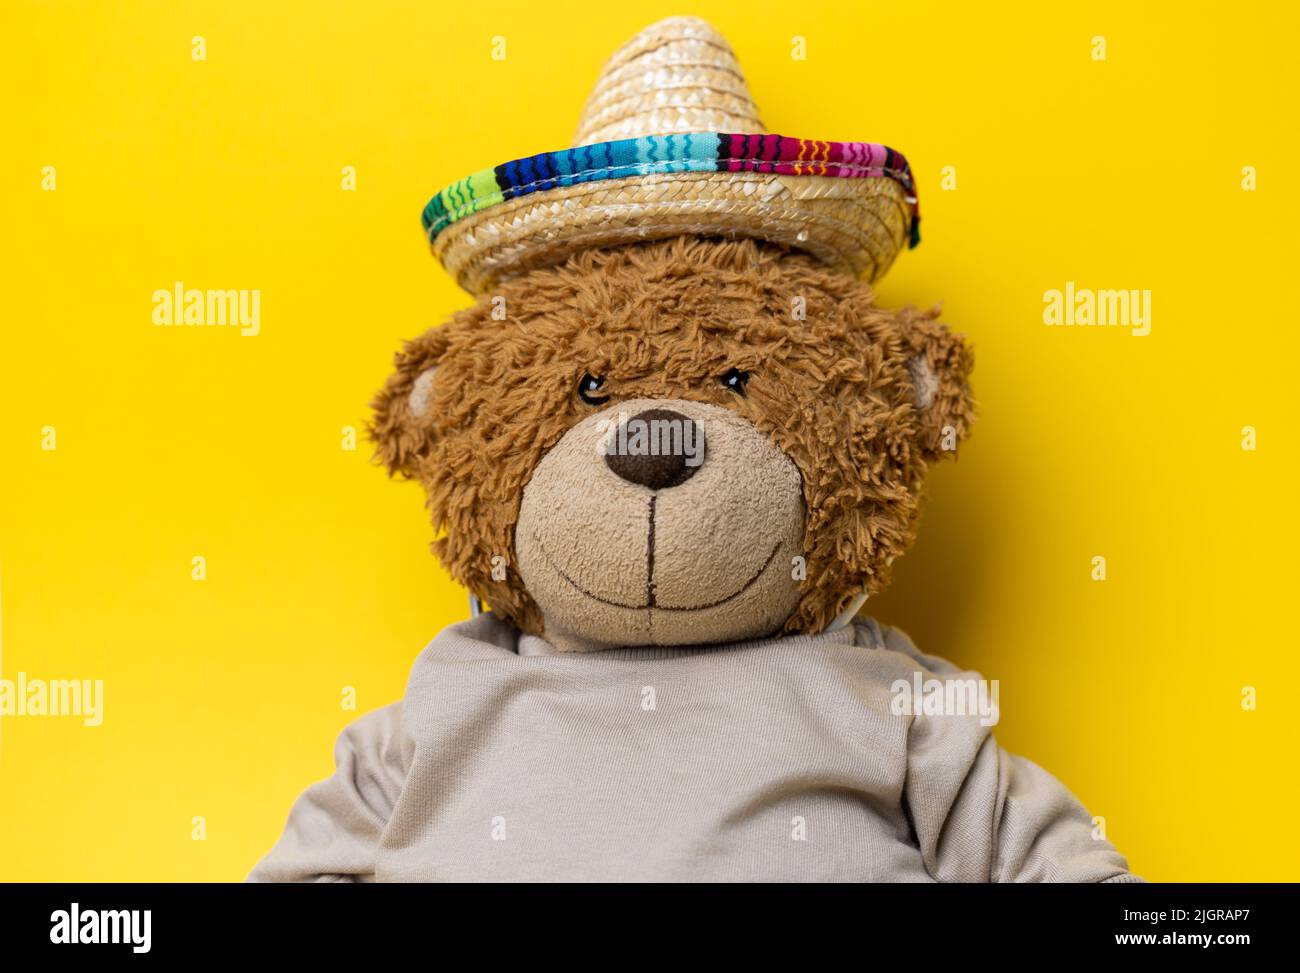 Adorable Teddy Bear with a straw hat. Cute Plush with a Pullover and a hat. Stock Photo